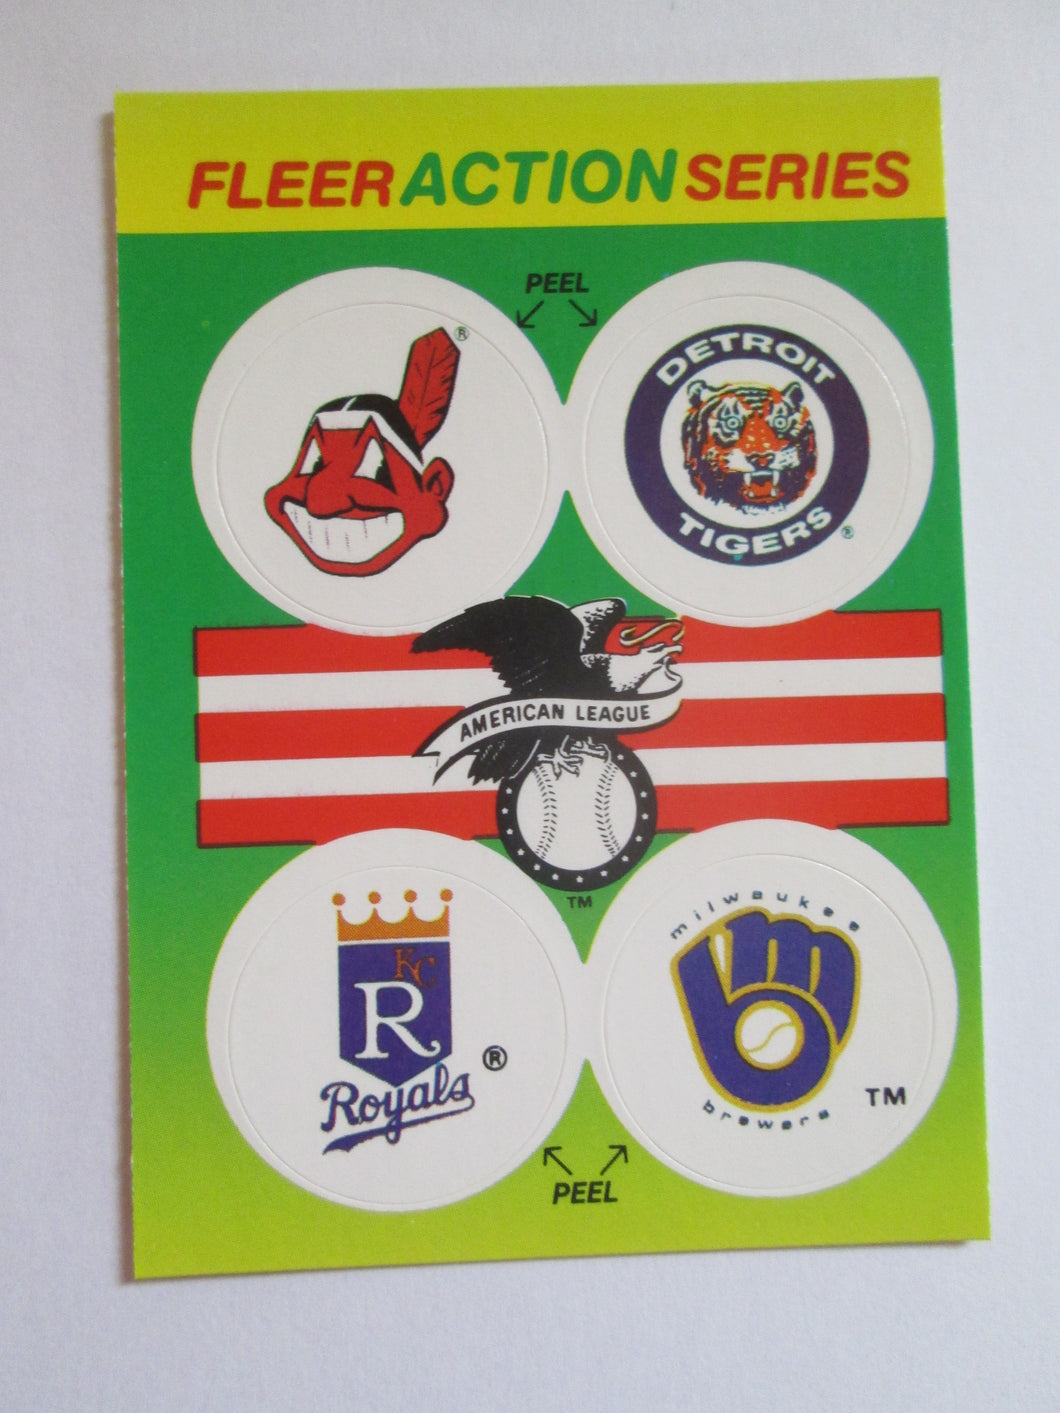 Fleer Action Series Set of 4 Club Stickers - Indians, Tigers, Royals, Brewers 1990